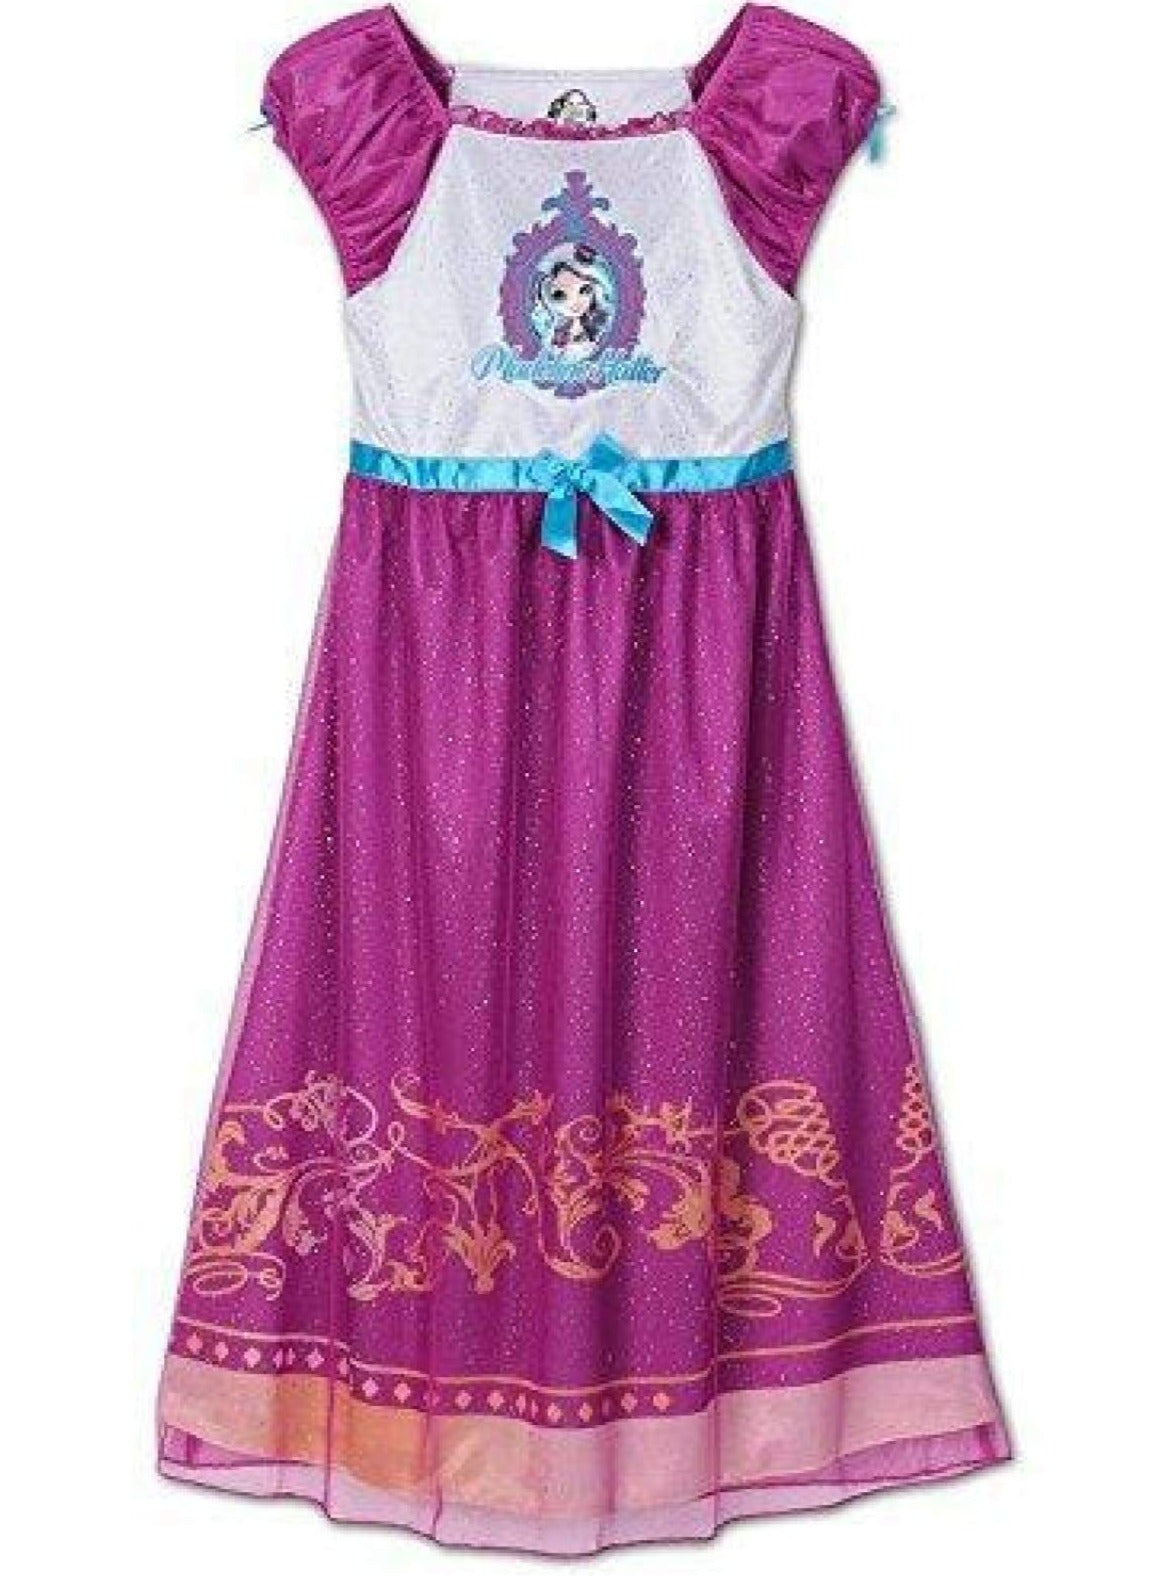 Ever After High Madeline Hatter Girls Nightgown Pajama - Girls Pajama